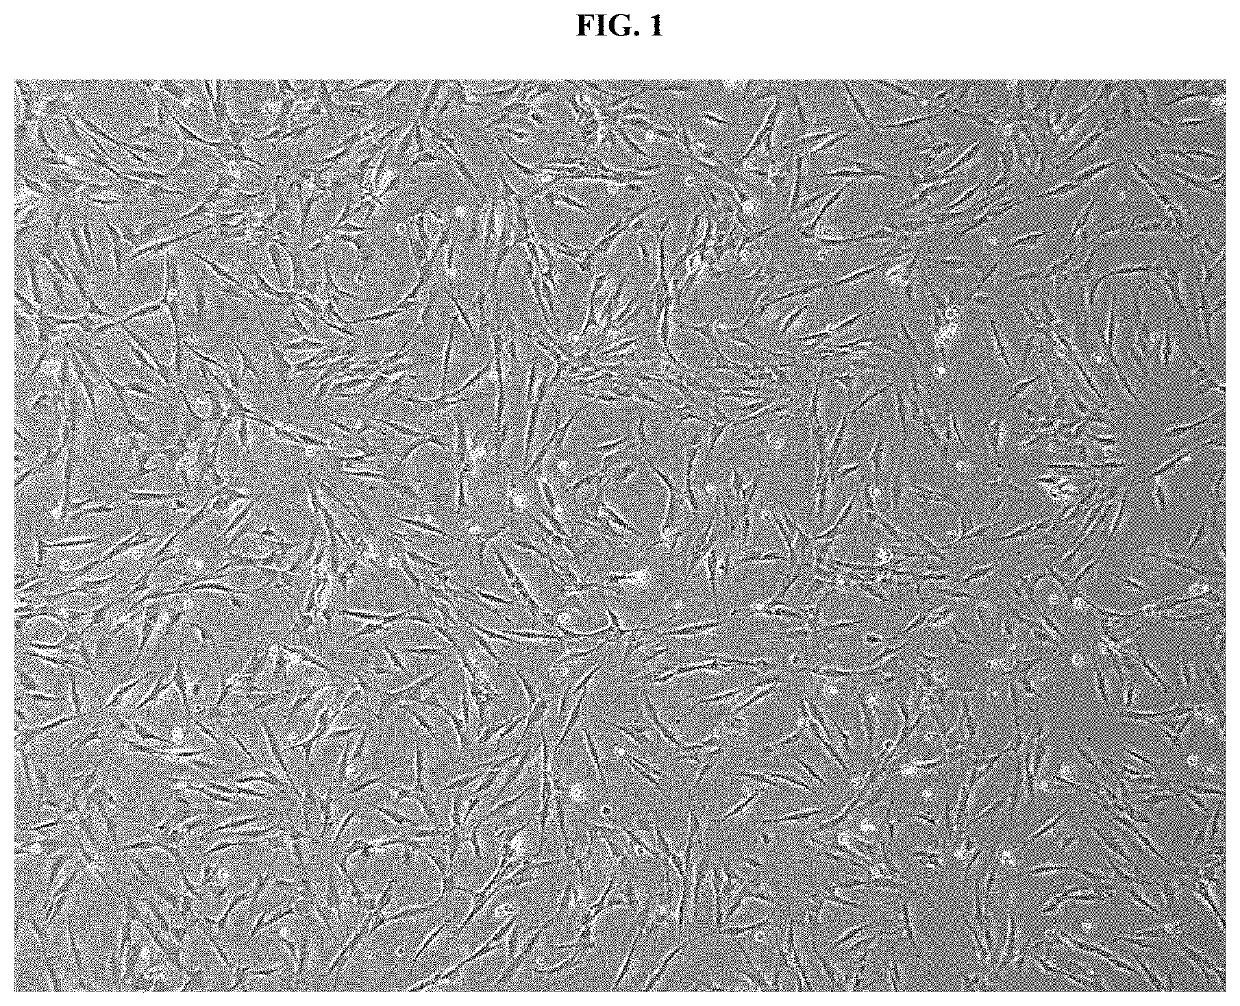 Pharmaceutical composition for preventing or treating rheumatoid arthritis comprising nasal inferior turbinate-derived mesenchymal stem cells as an active ingredient